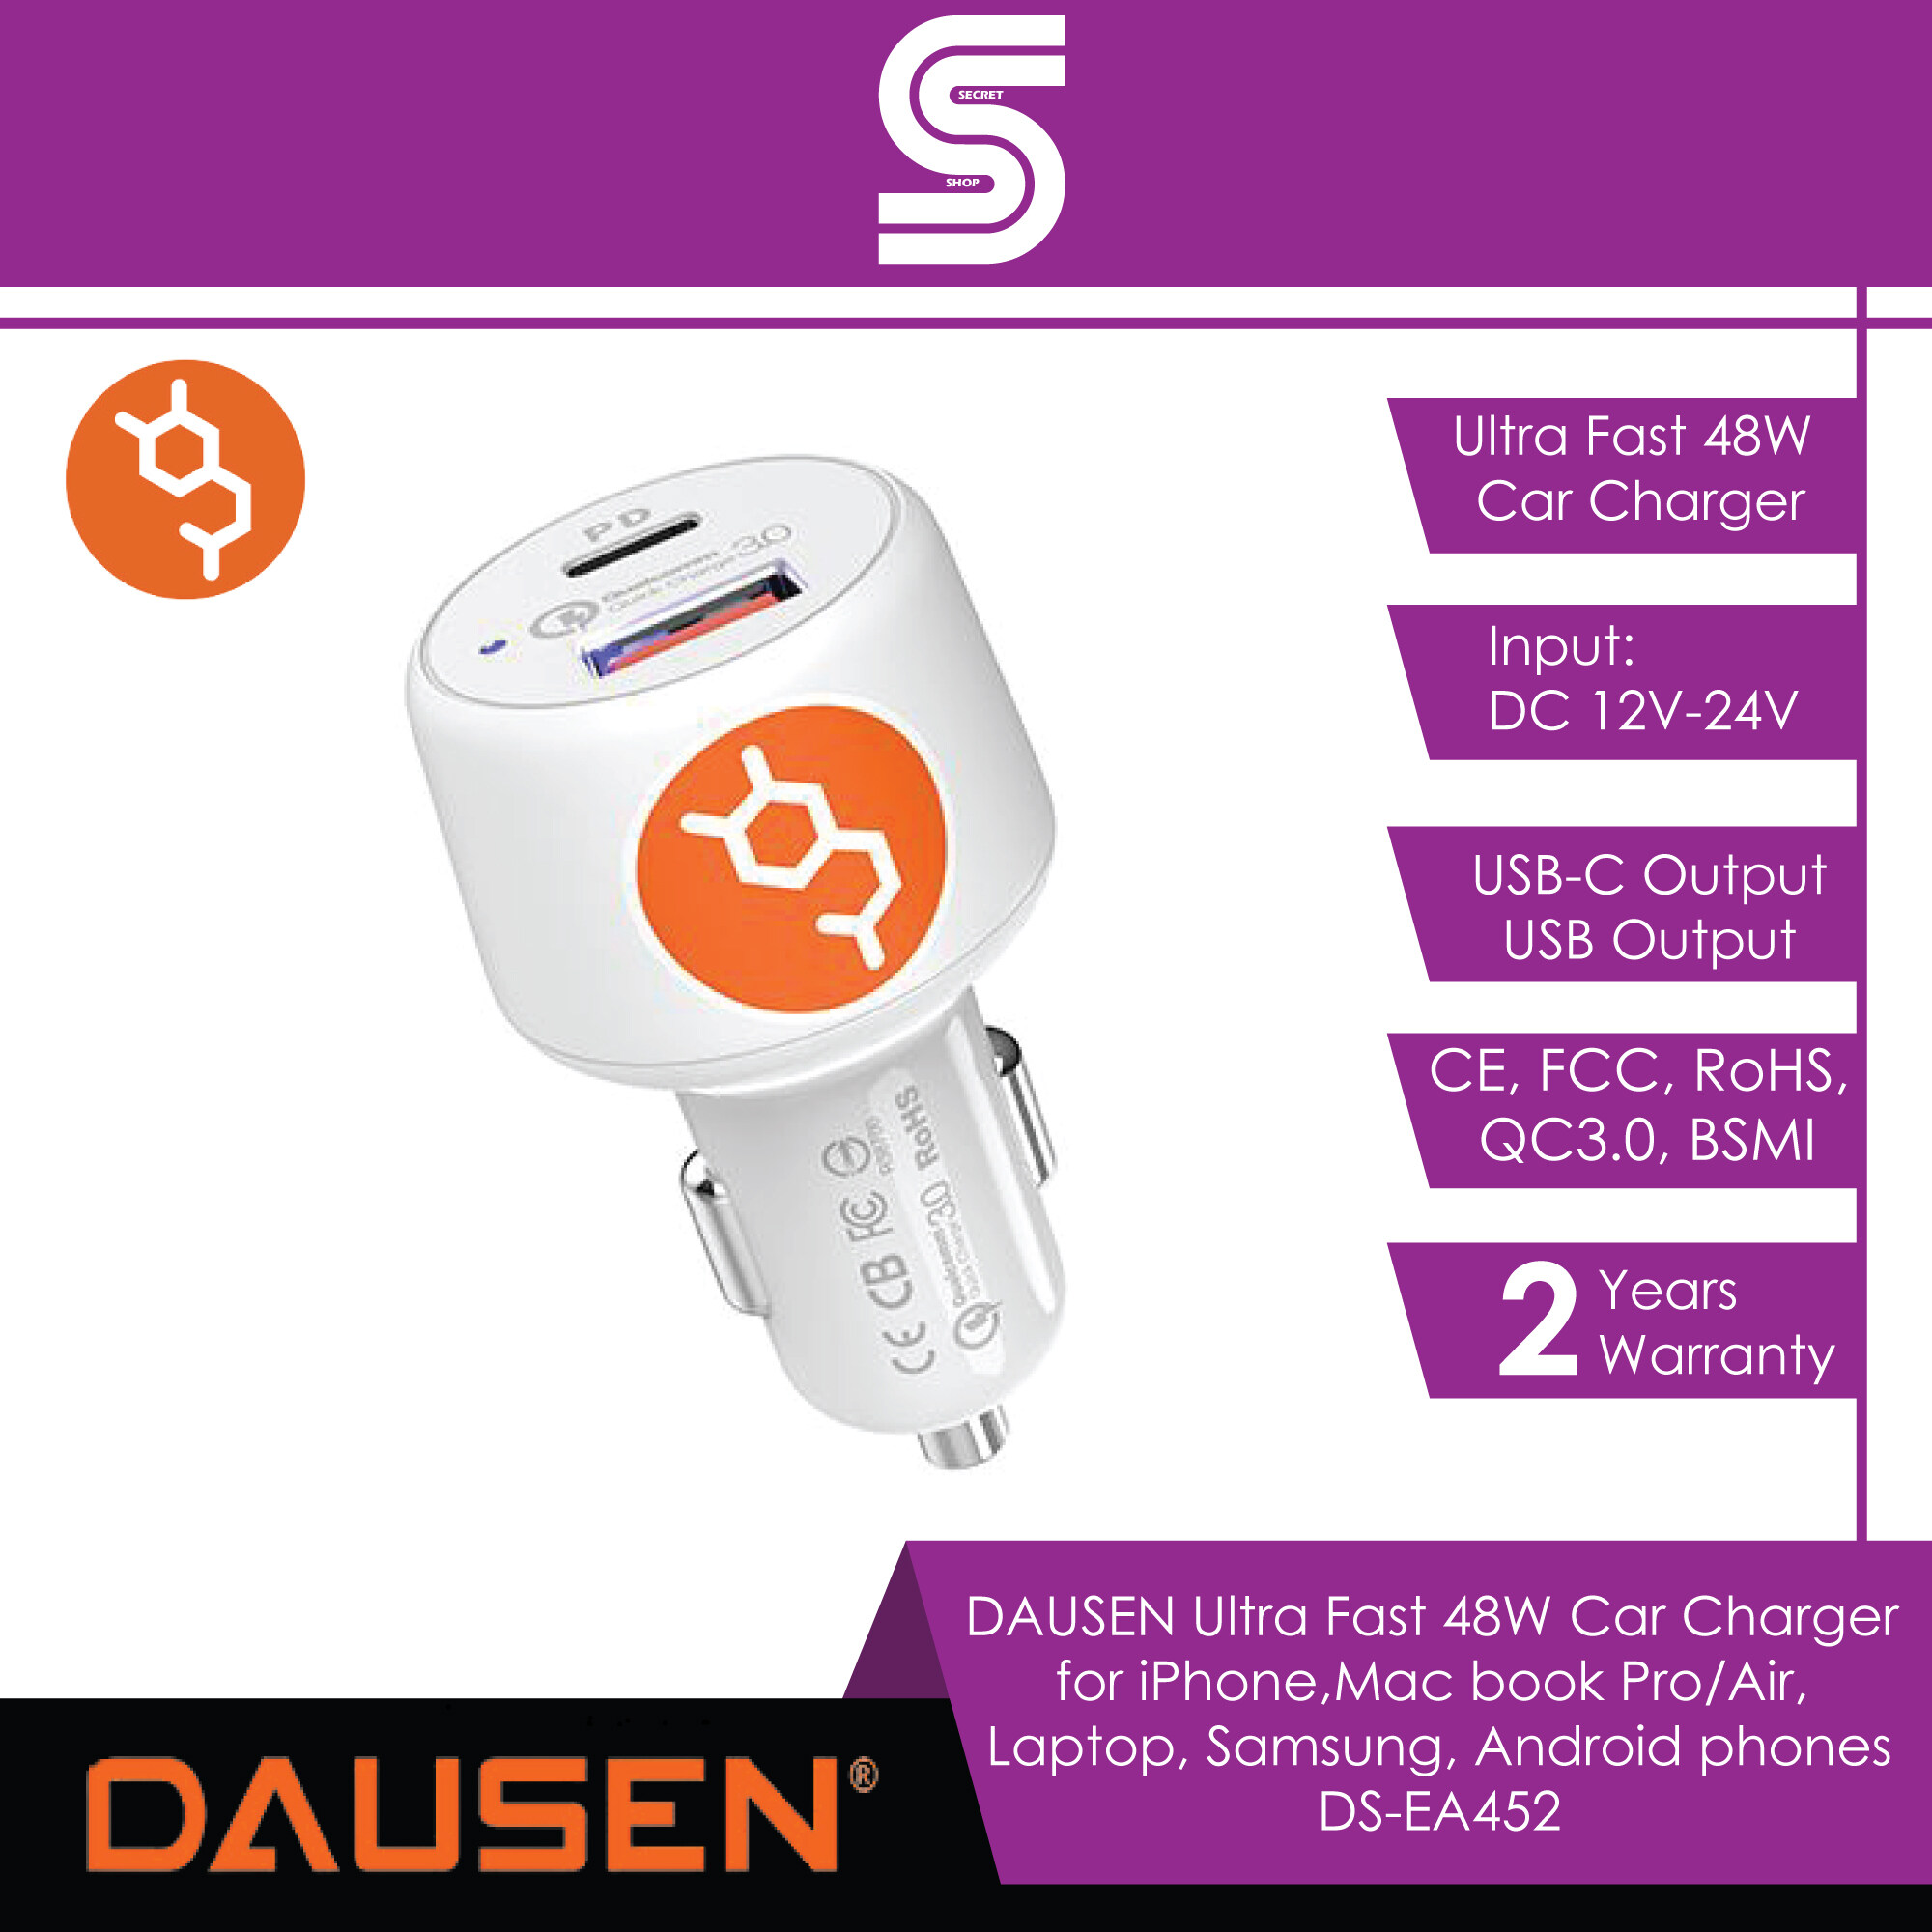 DAUSEN Ultra Fast 48W Car Charger for Mbook Pro/Air, Laptop, Samsung, Android phones